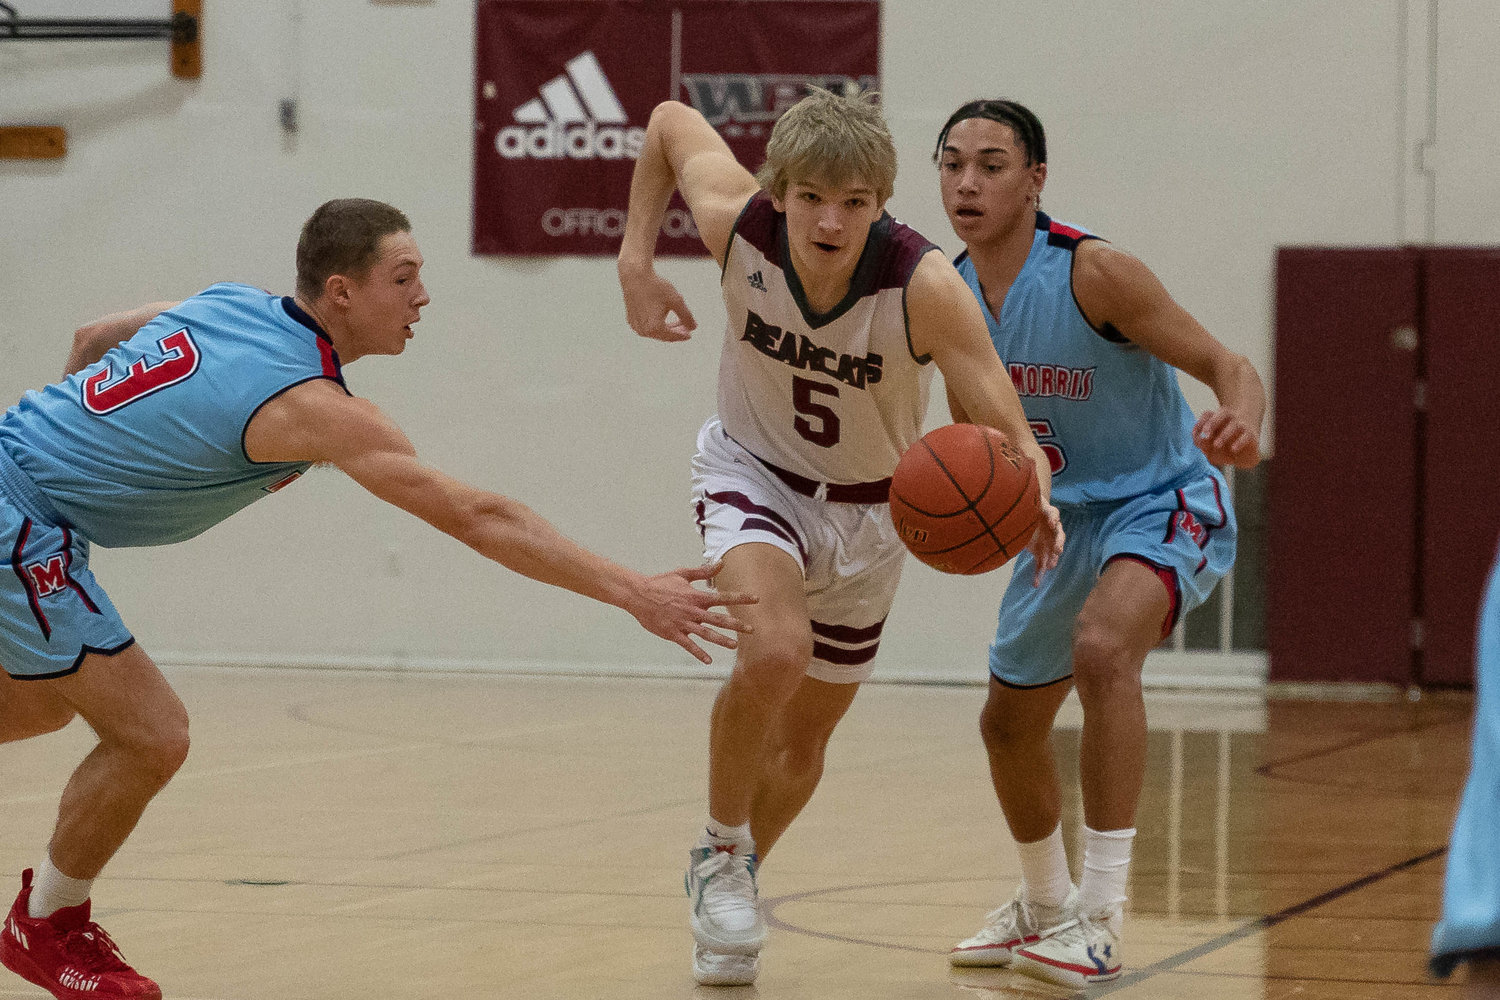 Bearcat guard Dirk Plakinger drives past the defense in a loss to Mark Morris in the opening round of the 2A District IV playoffs in Chehalis Feb. 12.